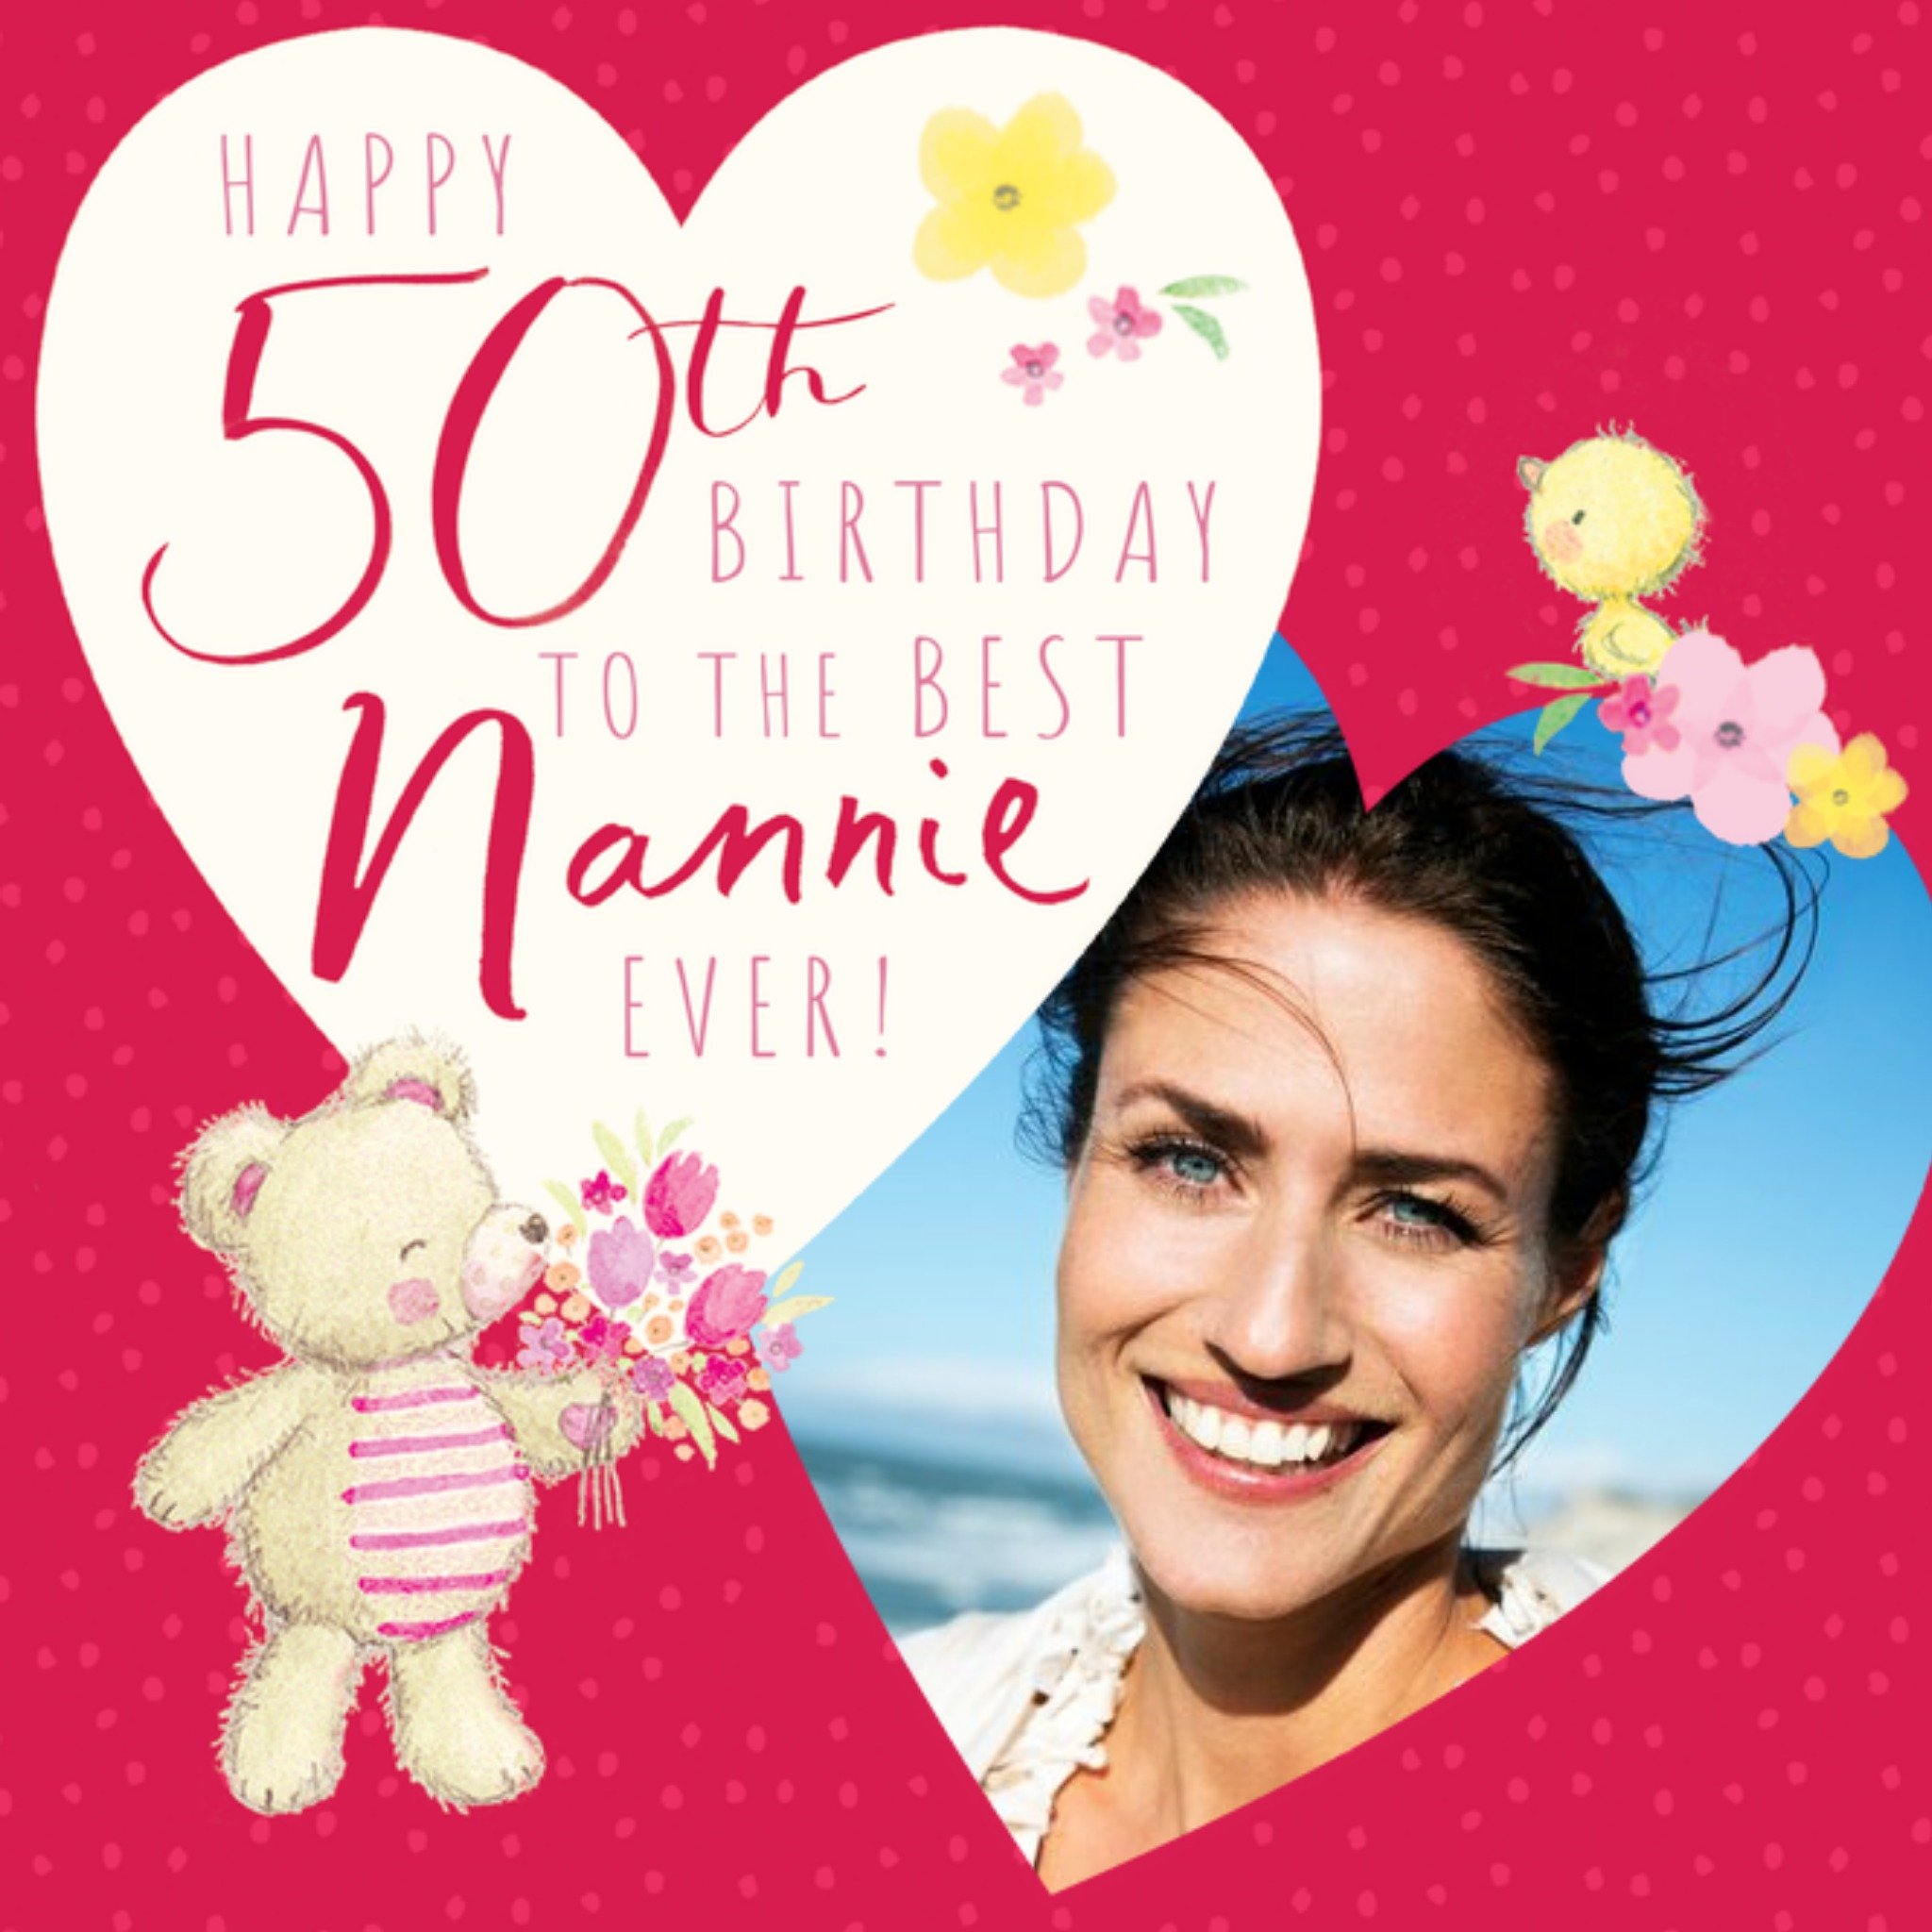 Moonpig Simple Illustrated Design Happy 50th Birthday To the Best Nannie Ever Photo Upload Card, Lar